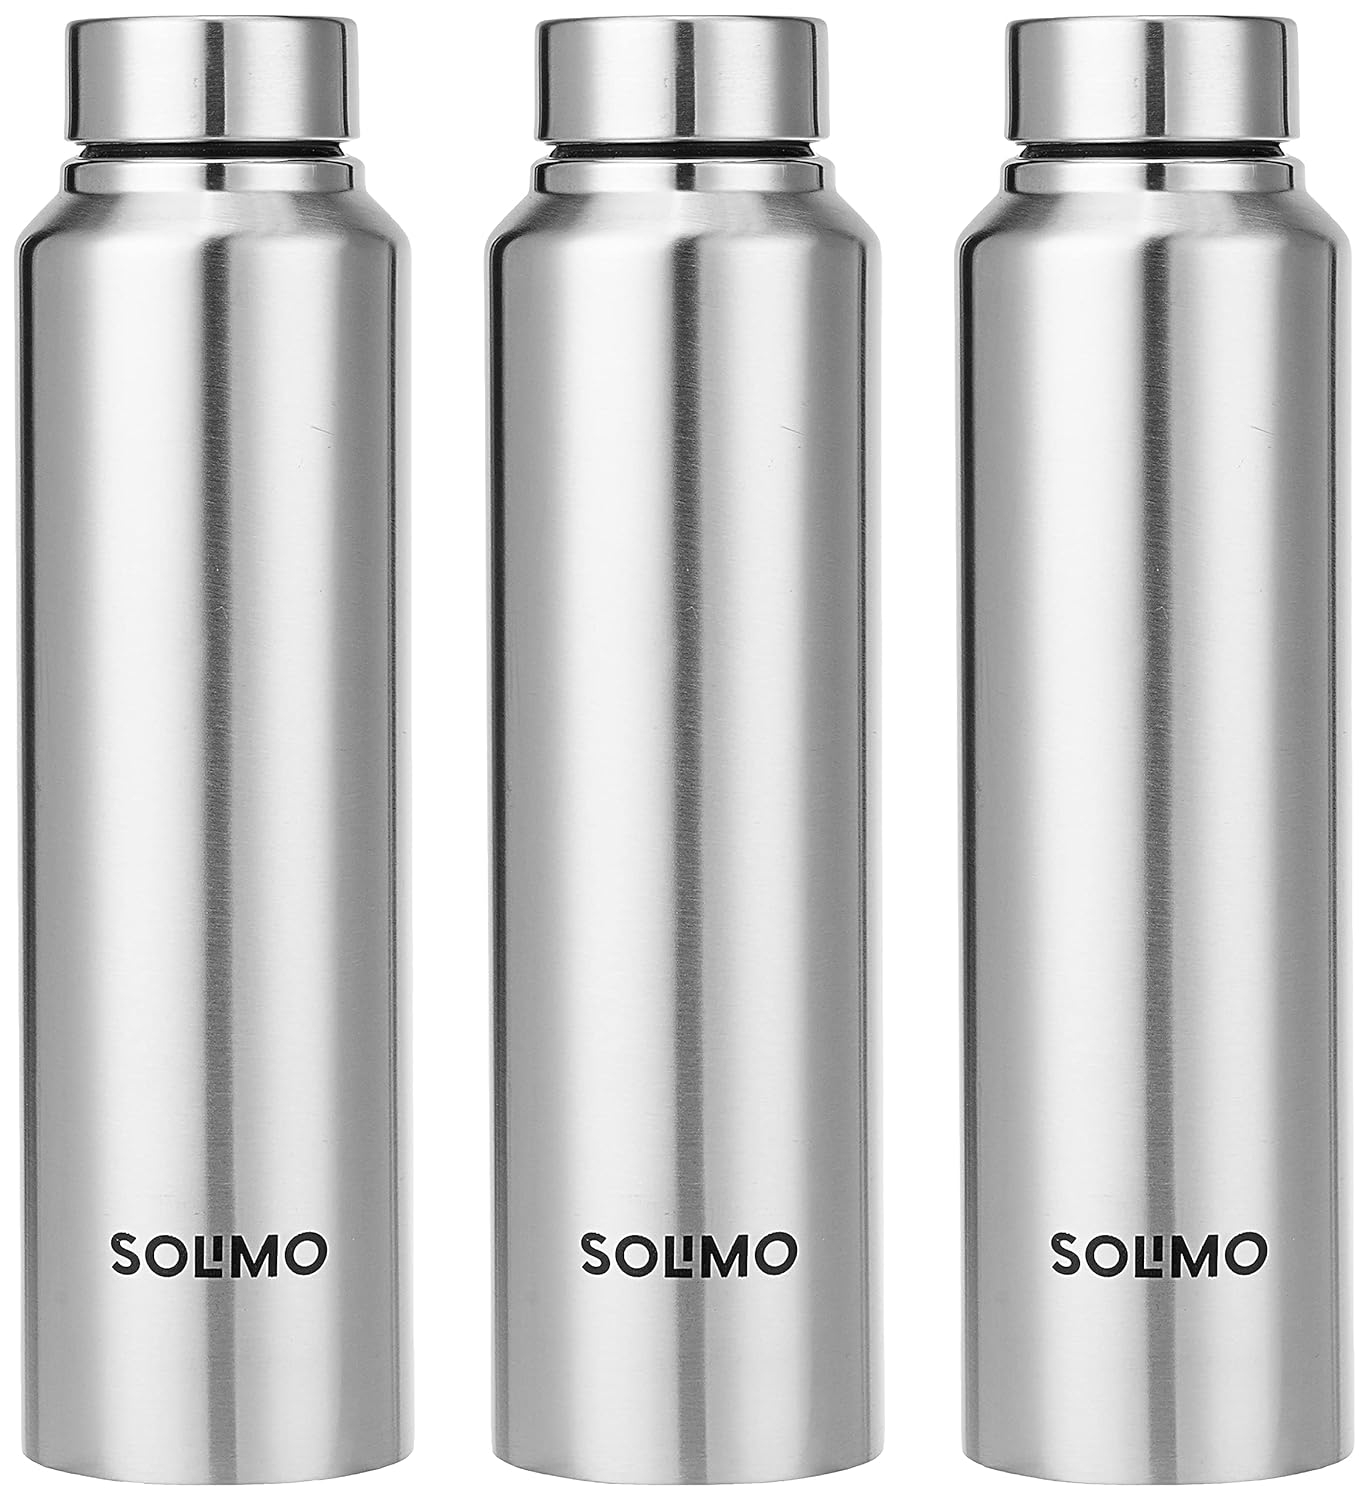 Solimo Slim Stainless Steel Water Bottle | spill proof, rust free body for juice, shake home office use (3 pcs/1 L)